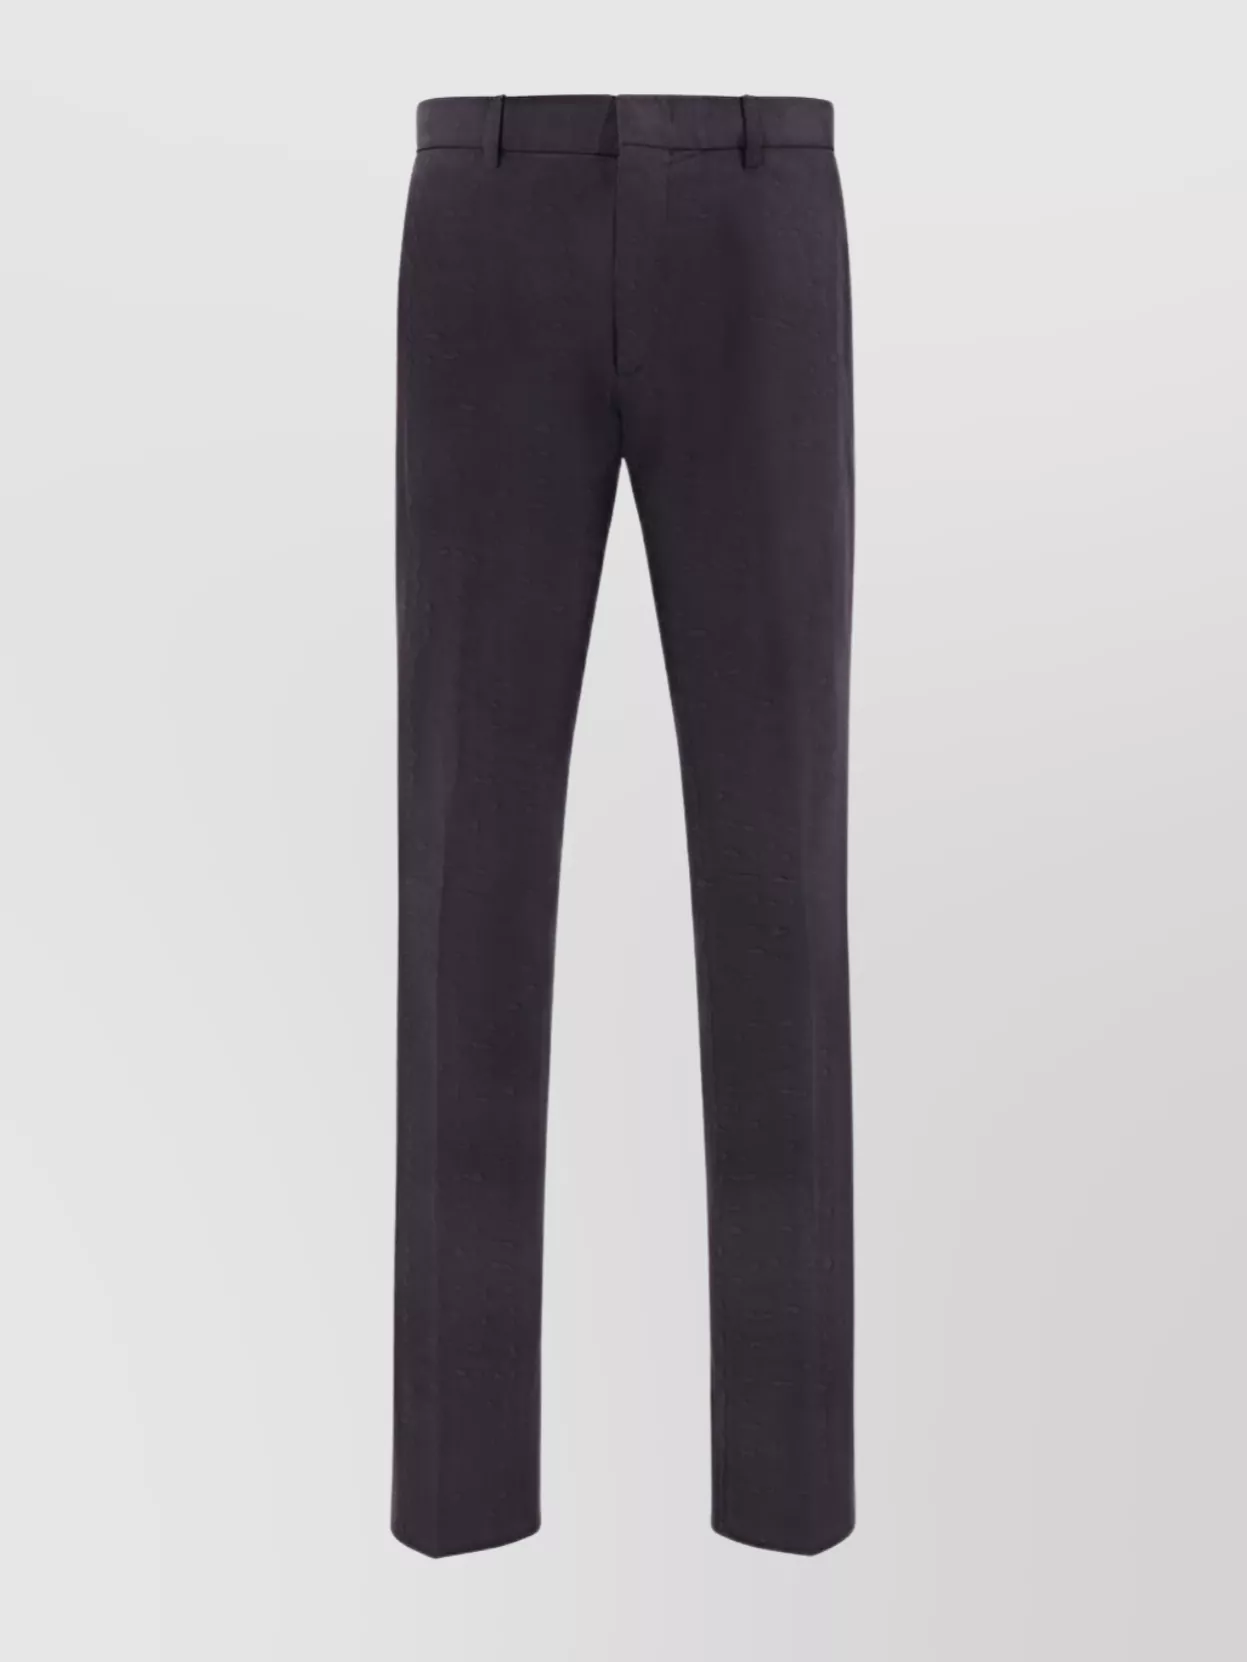 Zegna Trousers With Belt Loops Waistband In Gray